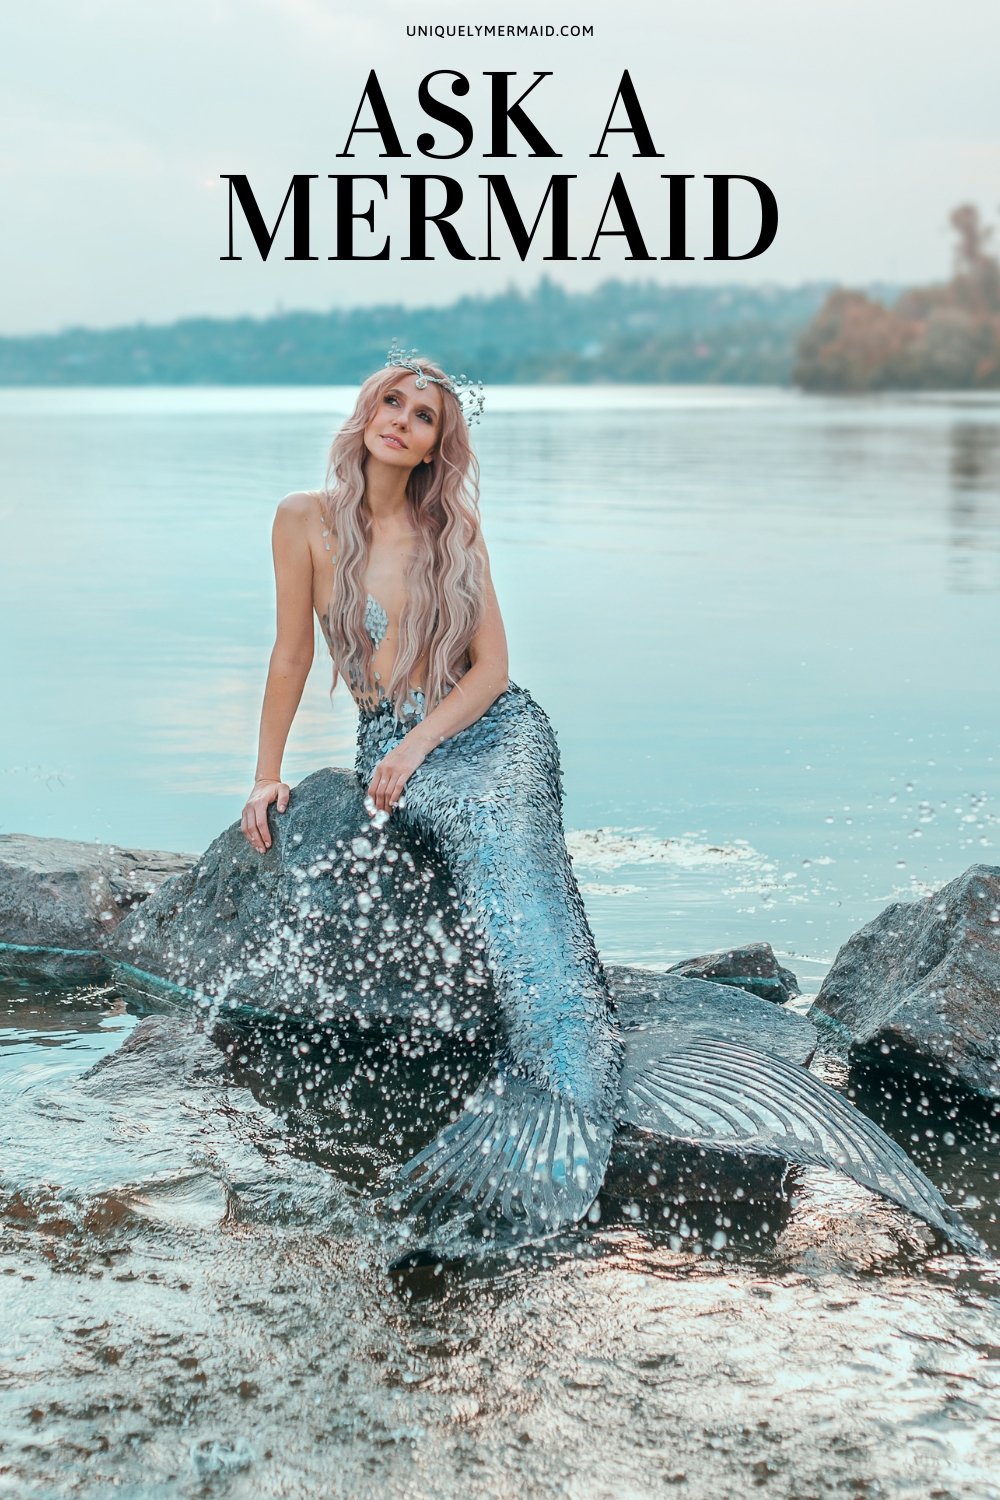 Have you ever wanted to ask a mermaid what life below the sea is like? This entertaining rhyme will get your questions answered!